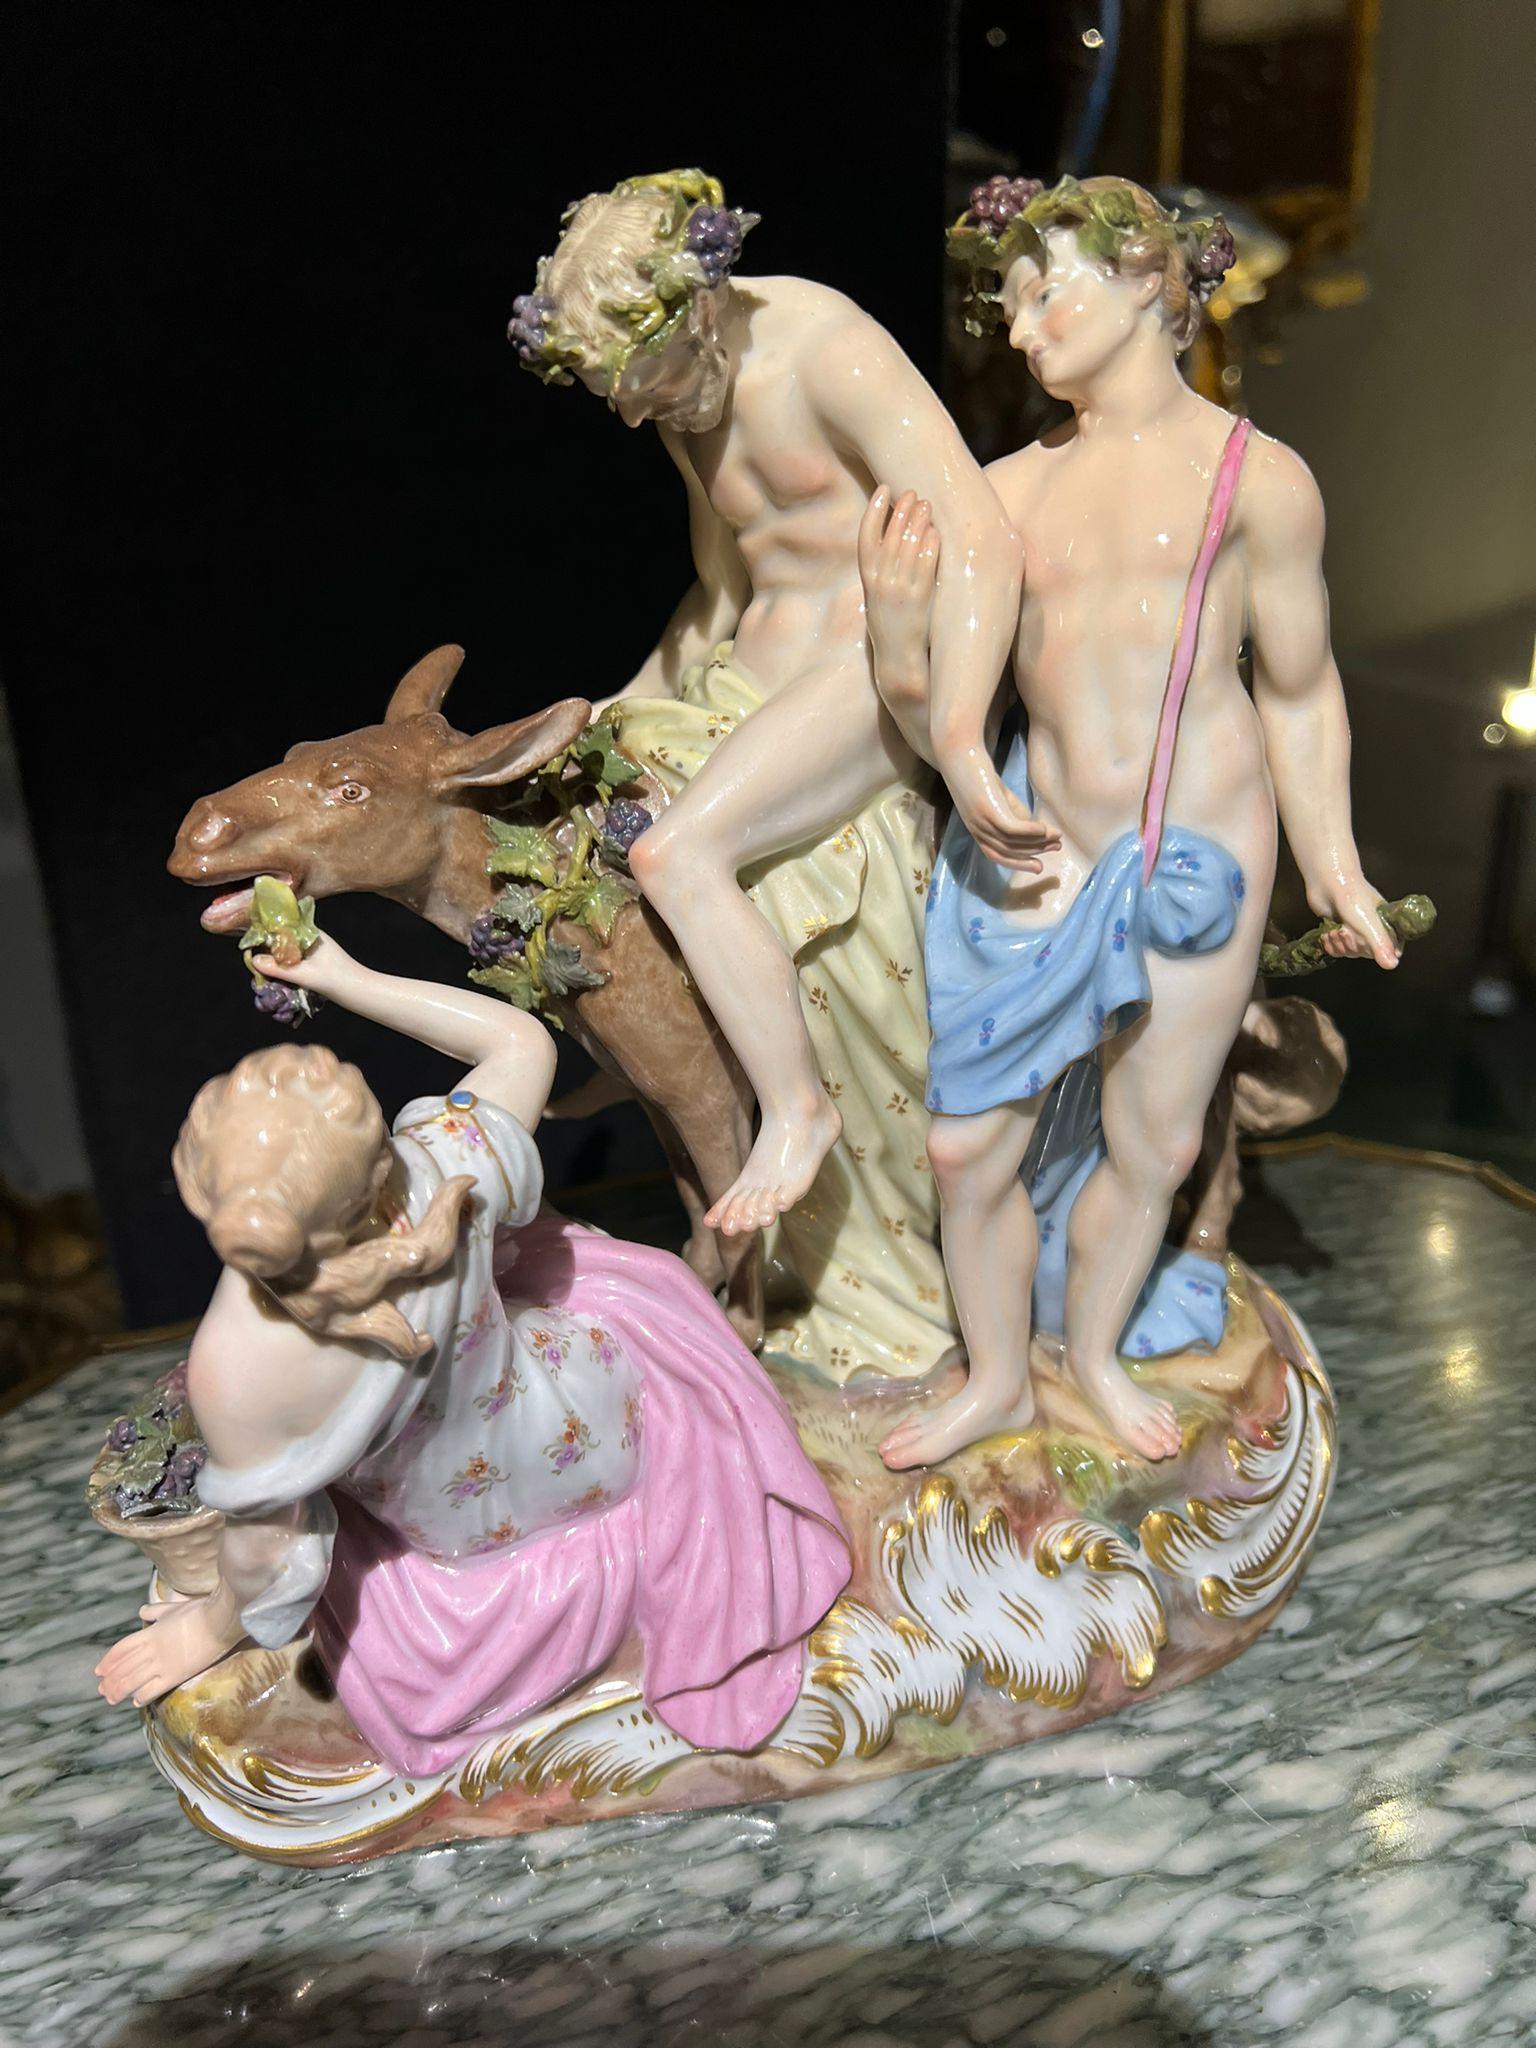 Group of figures ''Drunk Silenus'', Meissen Porcelain, painted in polychrome and gold.

It represents a group of bacchae standing on a stylized rocky pedestal, in the center the drunken Silenus (educator of Dionysus) sitting on a mule having a